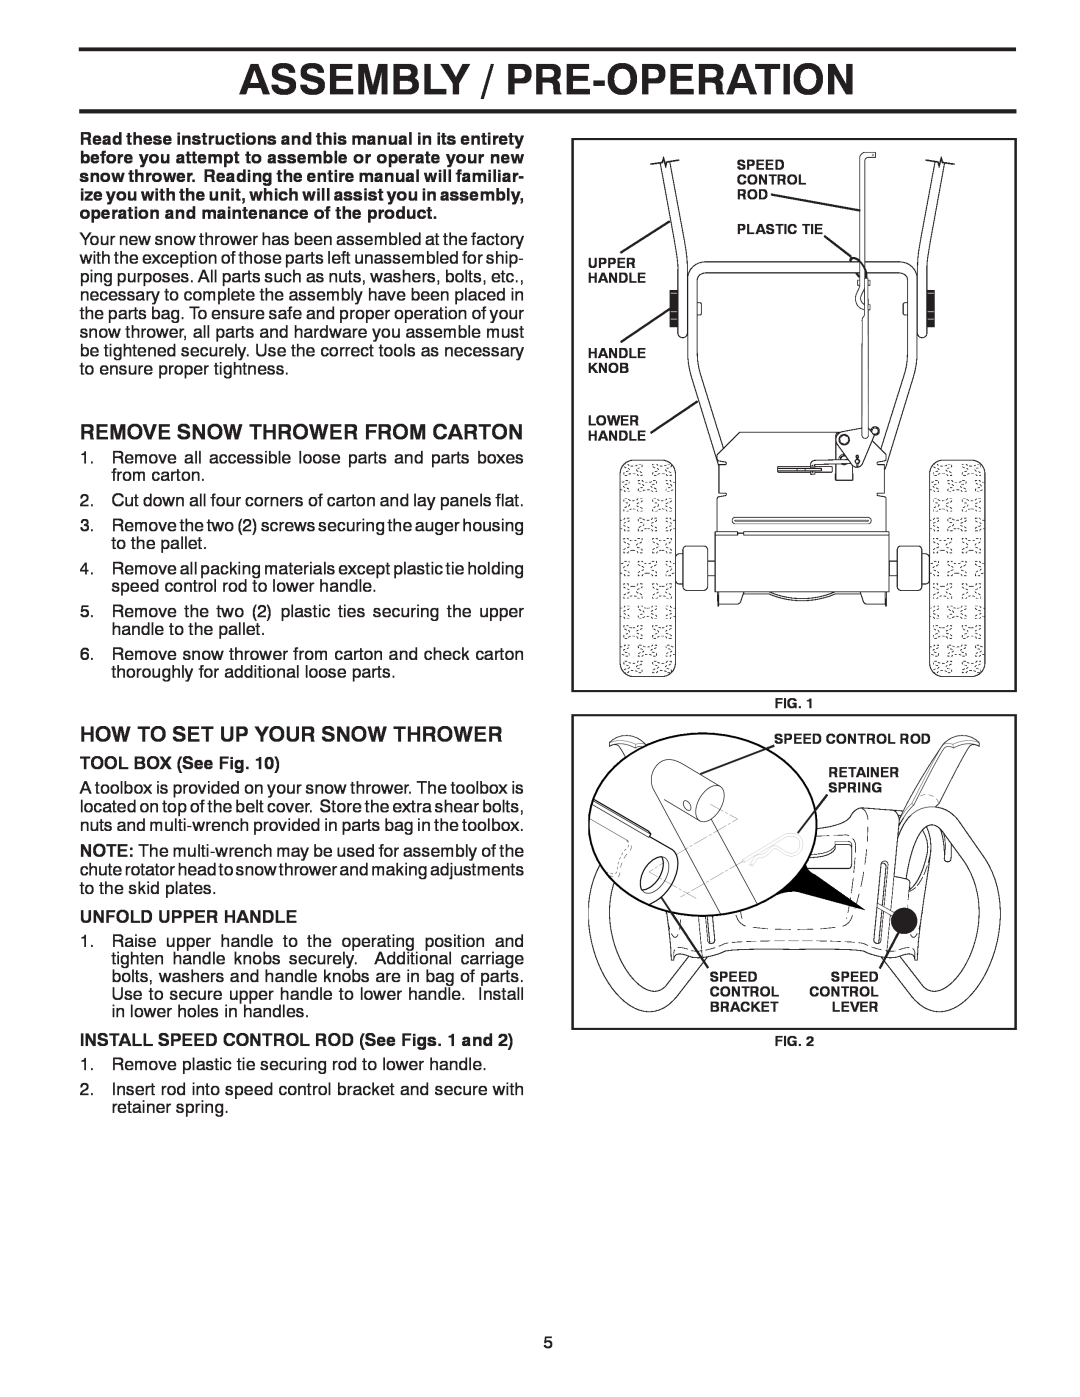 Poulan 421104 owner manual Assembly / Pre-Operation, Remove Snow Thrower From Carton, How To Set Up Your Snow Thrower 